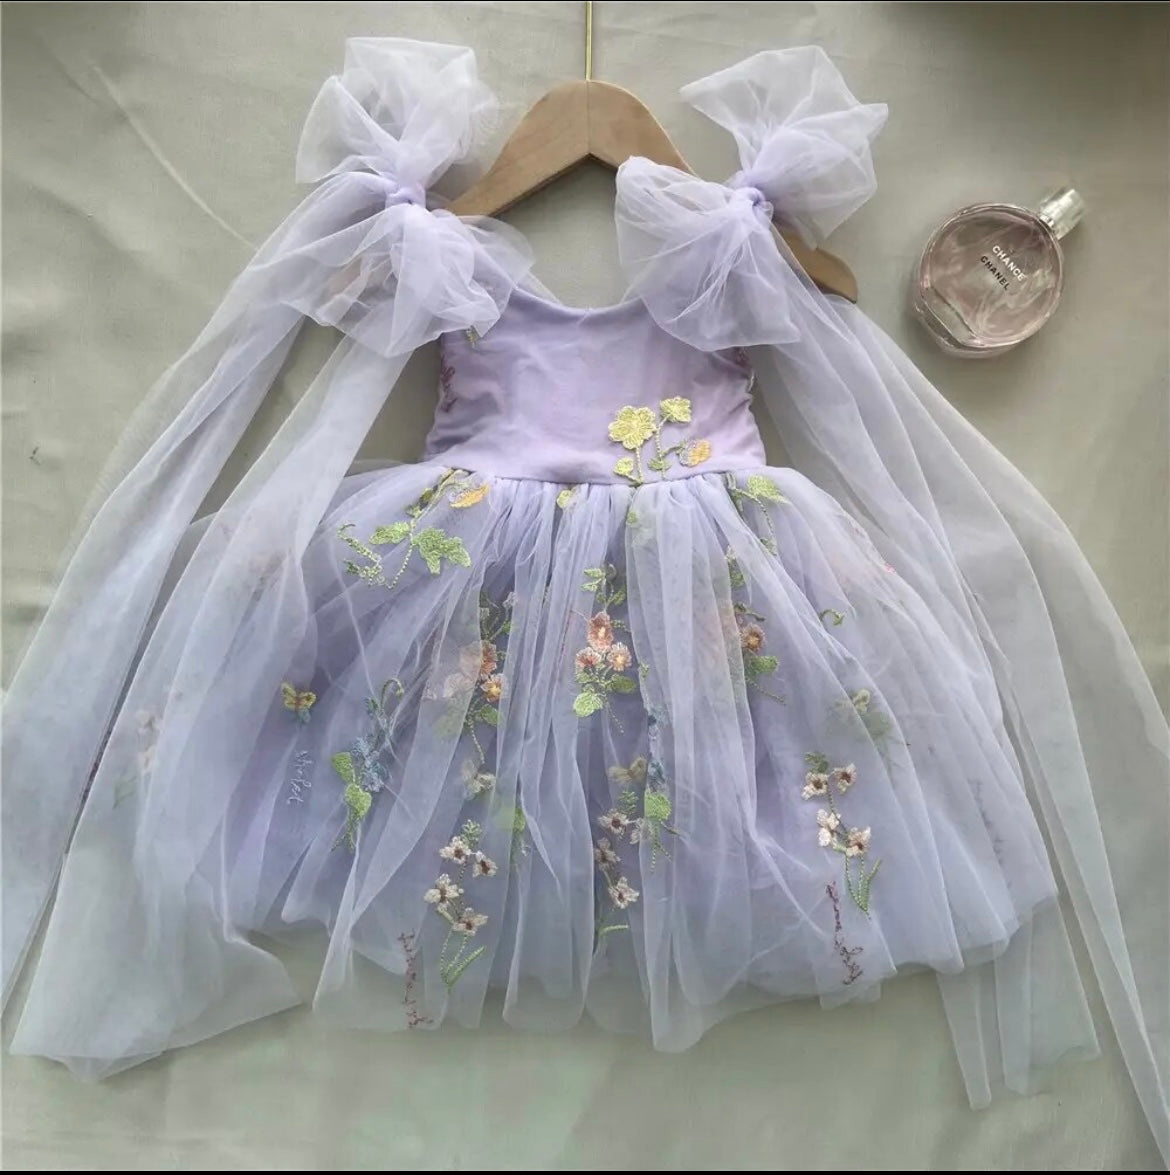 The Forget me not dress